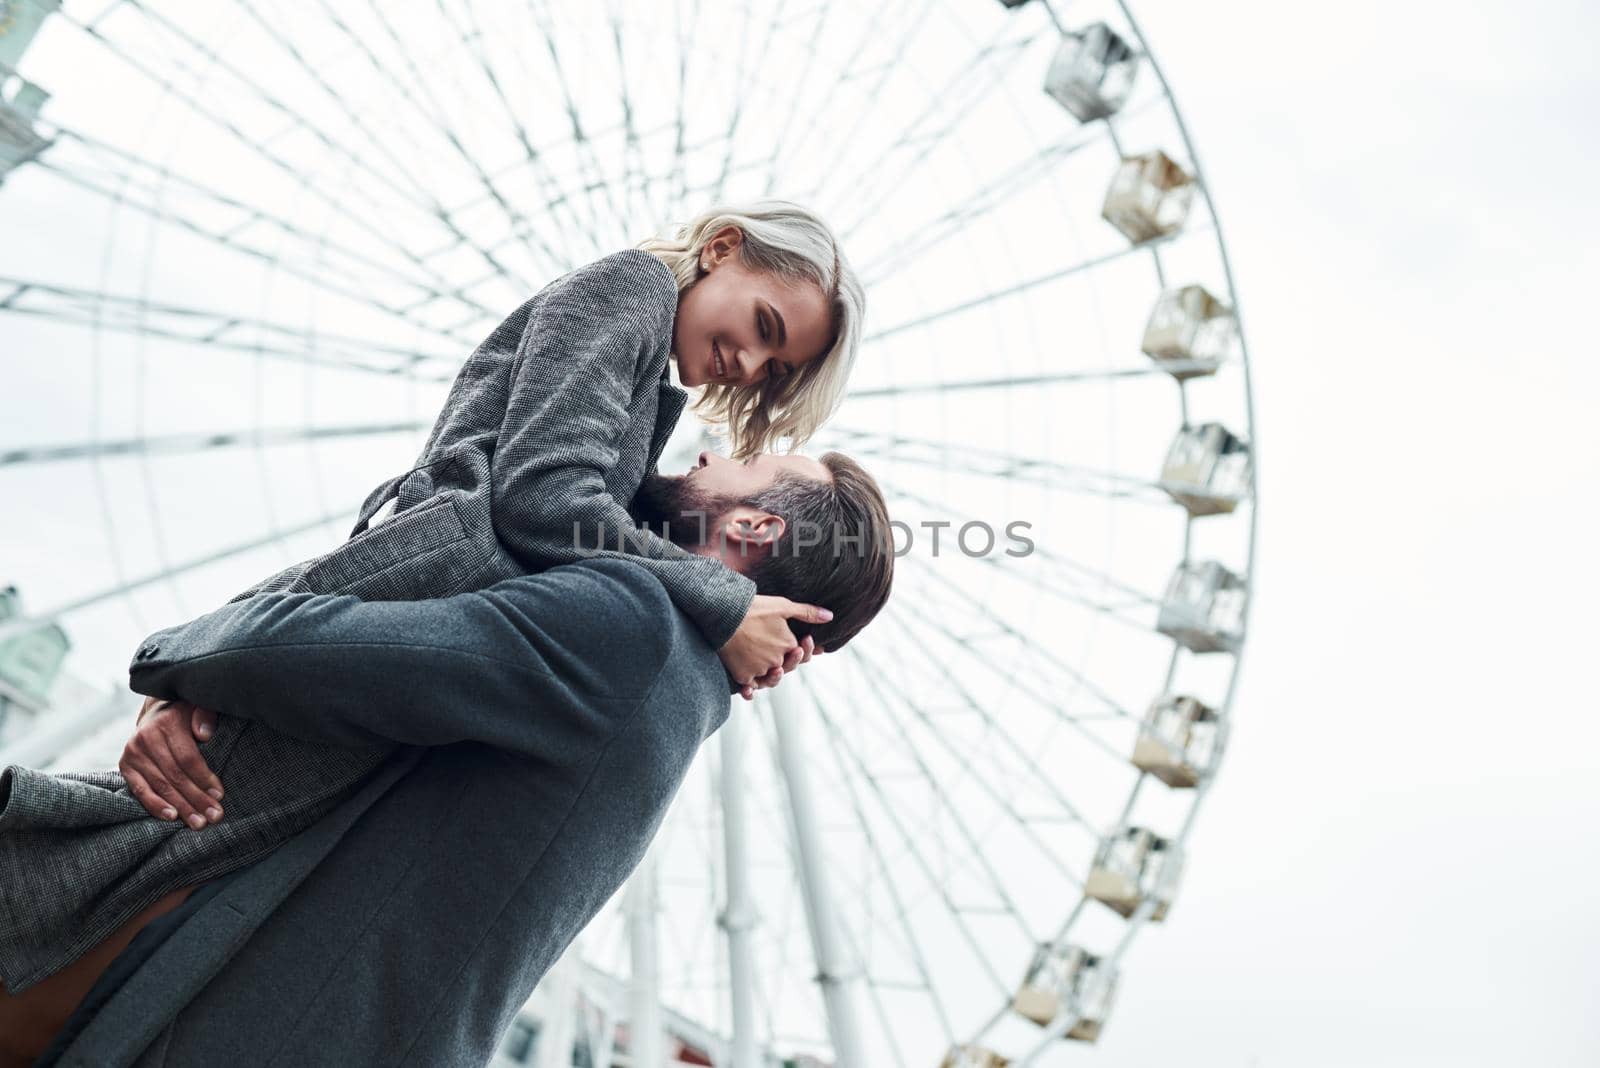 Romantic date outdoors. Young man holding woman up near the ferris wheel looking at each other smiling cheerful by friendsstock